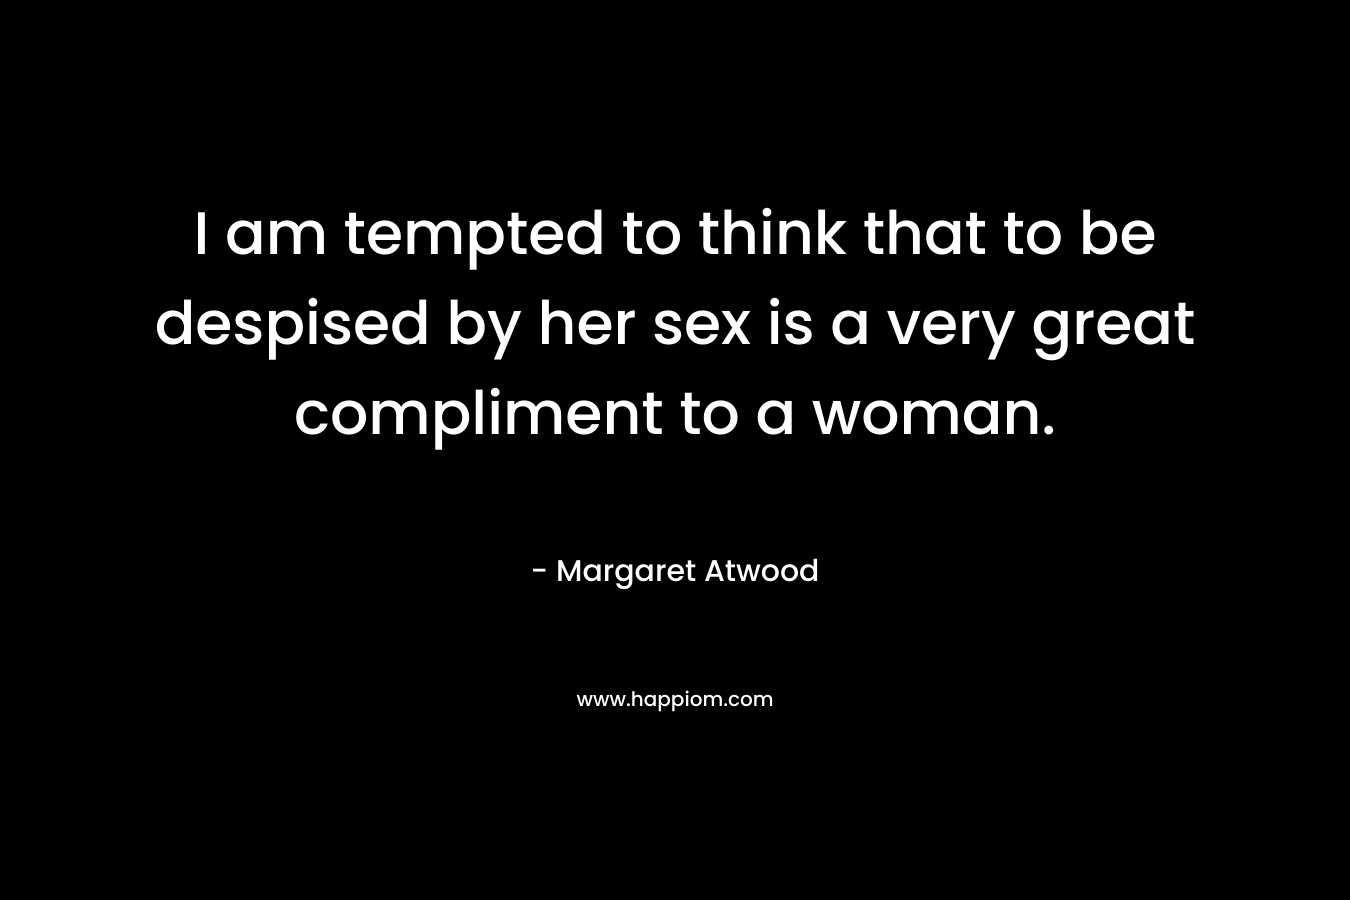 I am tempted to think that to be despised by her sex is a very great compliment to a woman.